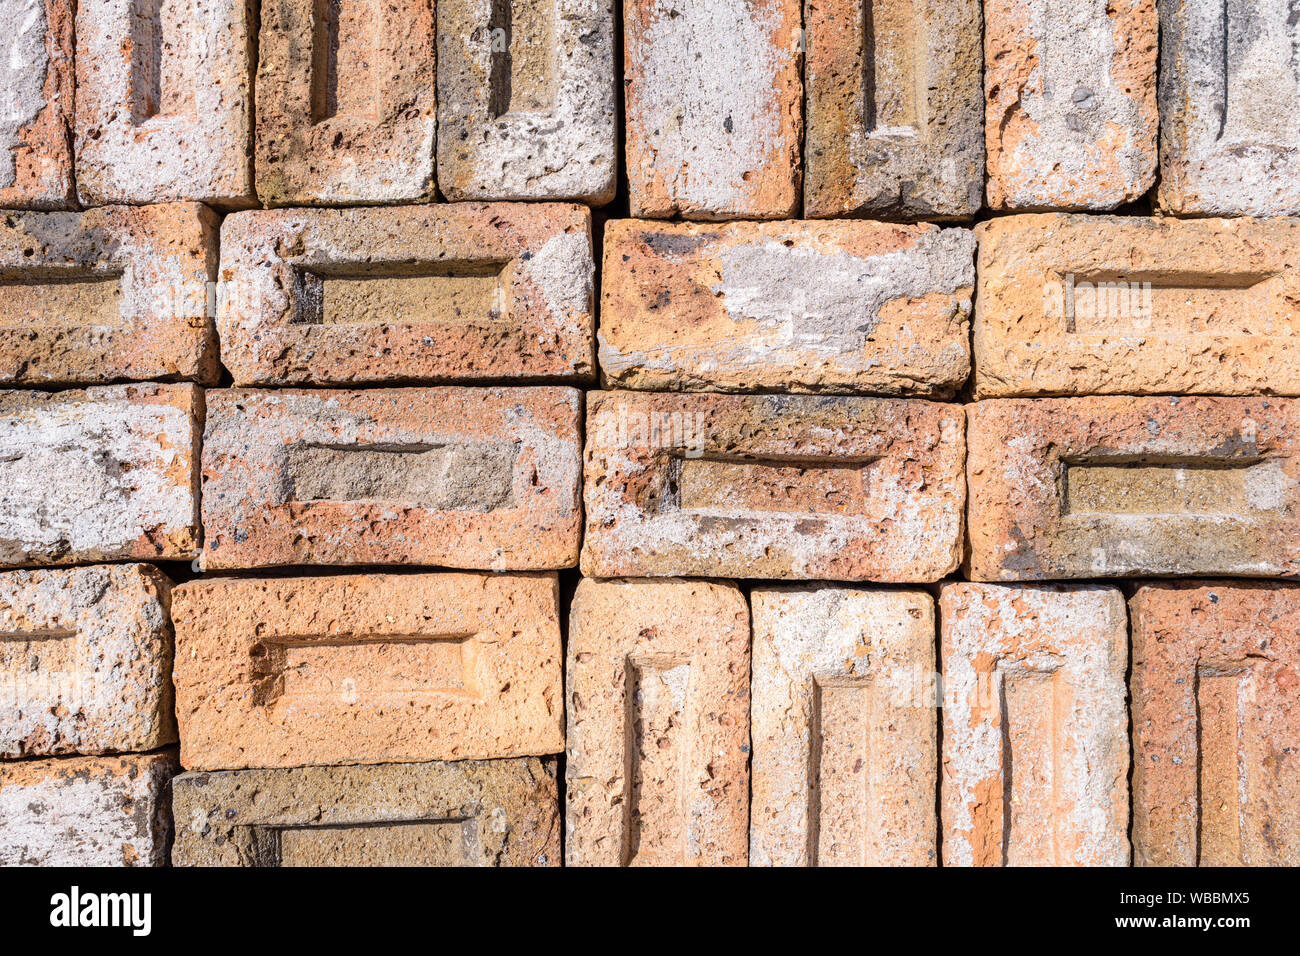 A collection of recycled old bricks. The bricks are cleaned from mortar and concrete and ready for reuse. Stock Photo